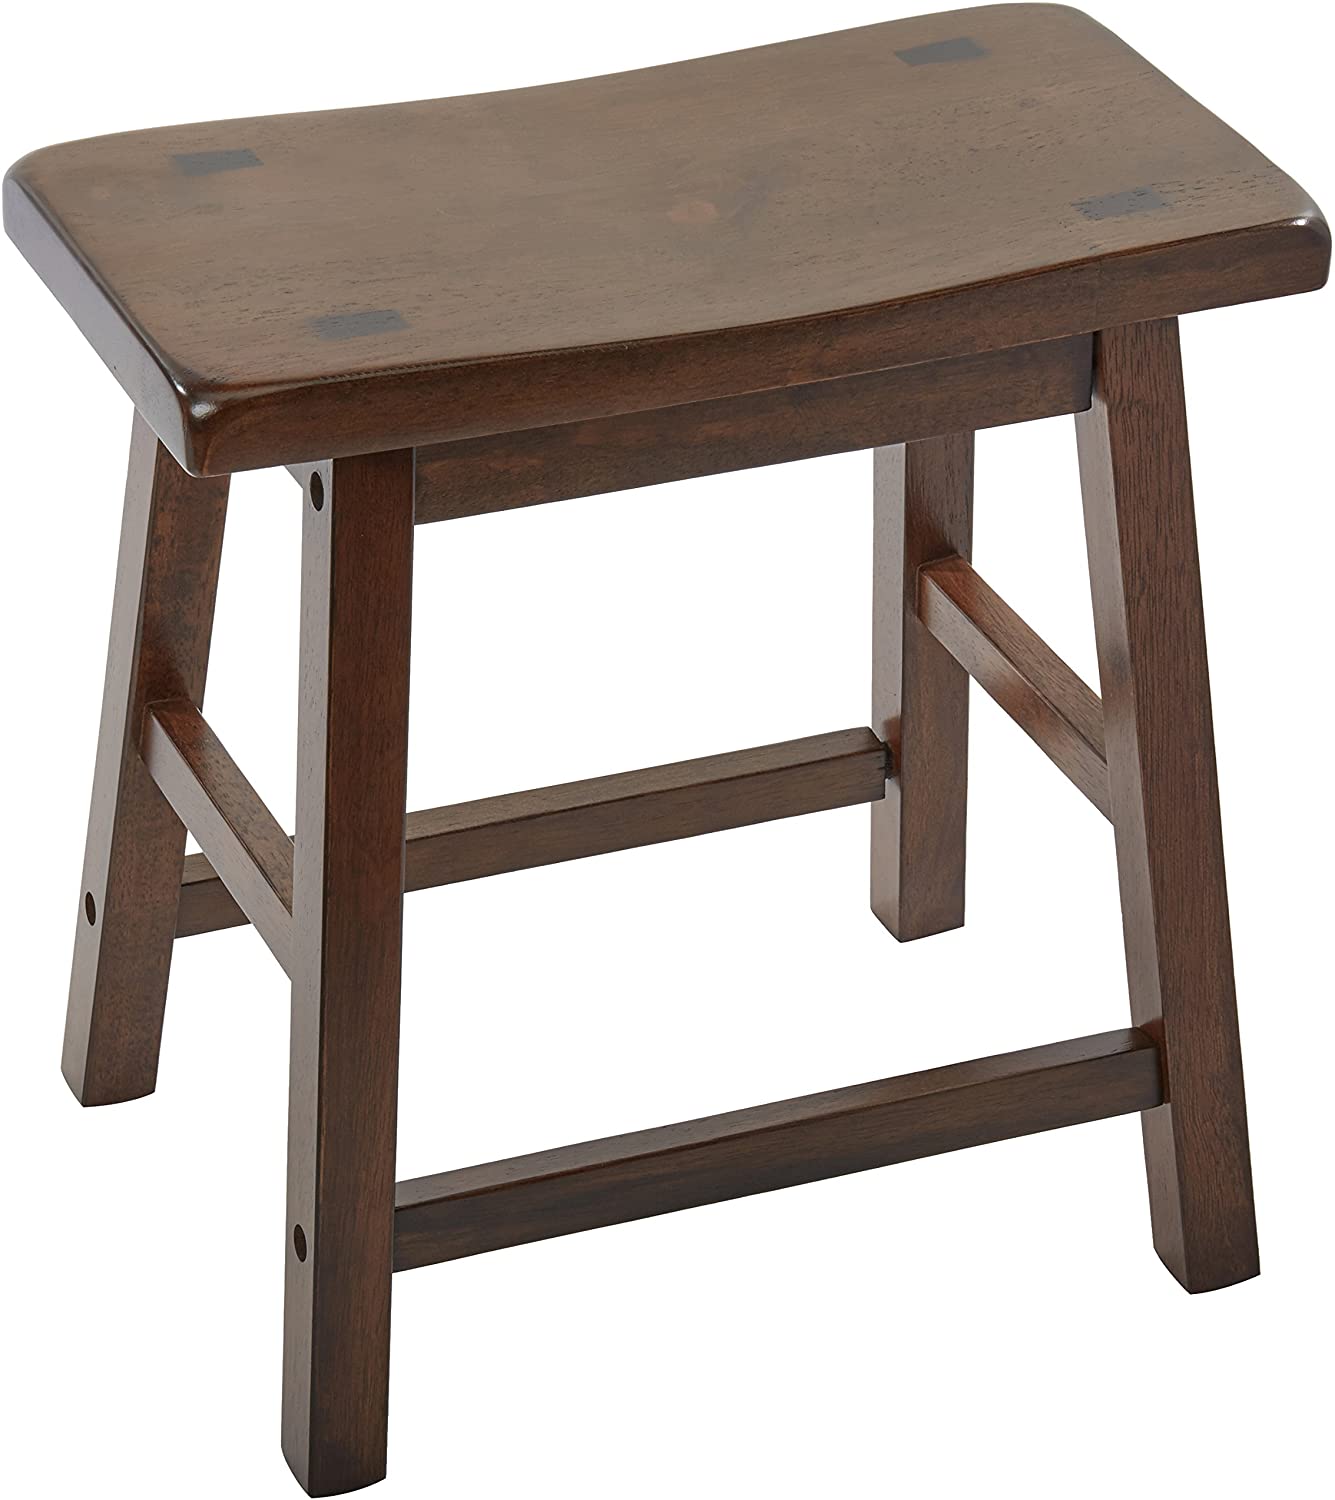 Acme Furniture Wooden Gaucho Stool, 18-Inch, 2-Pack